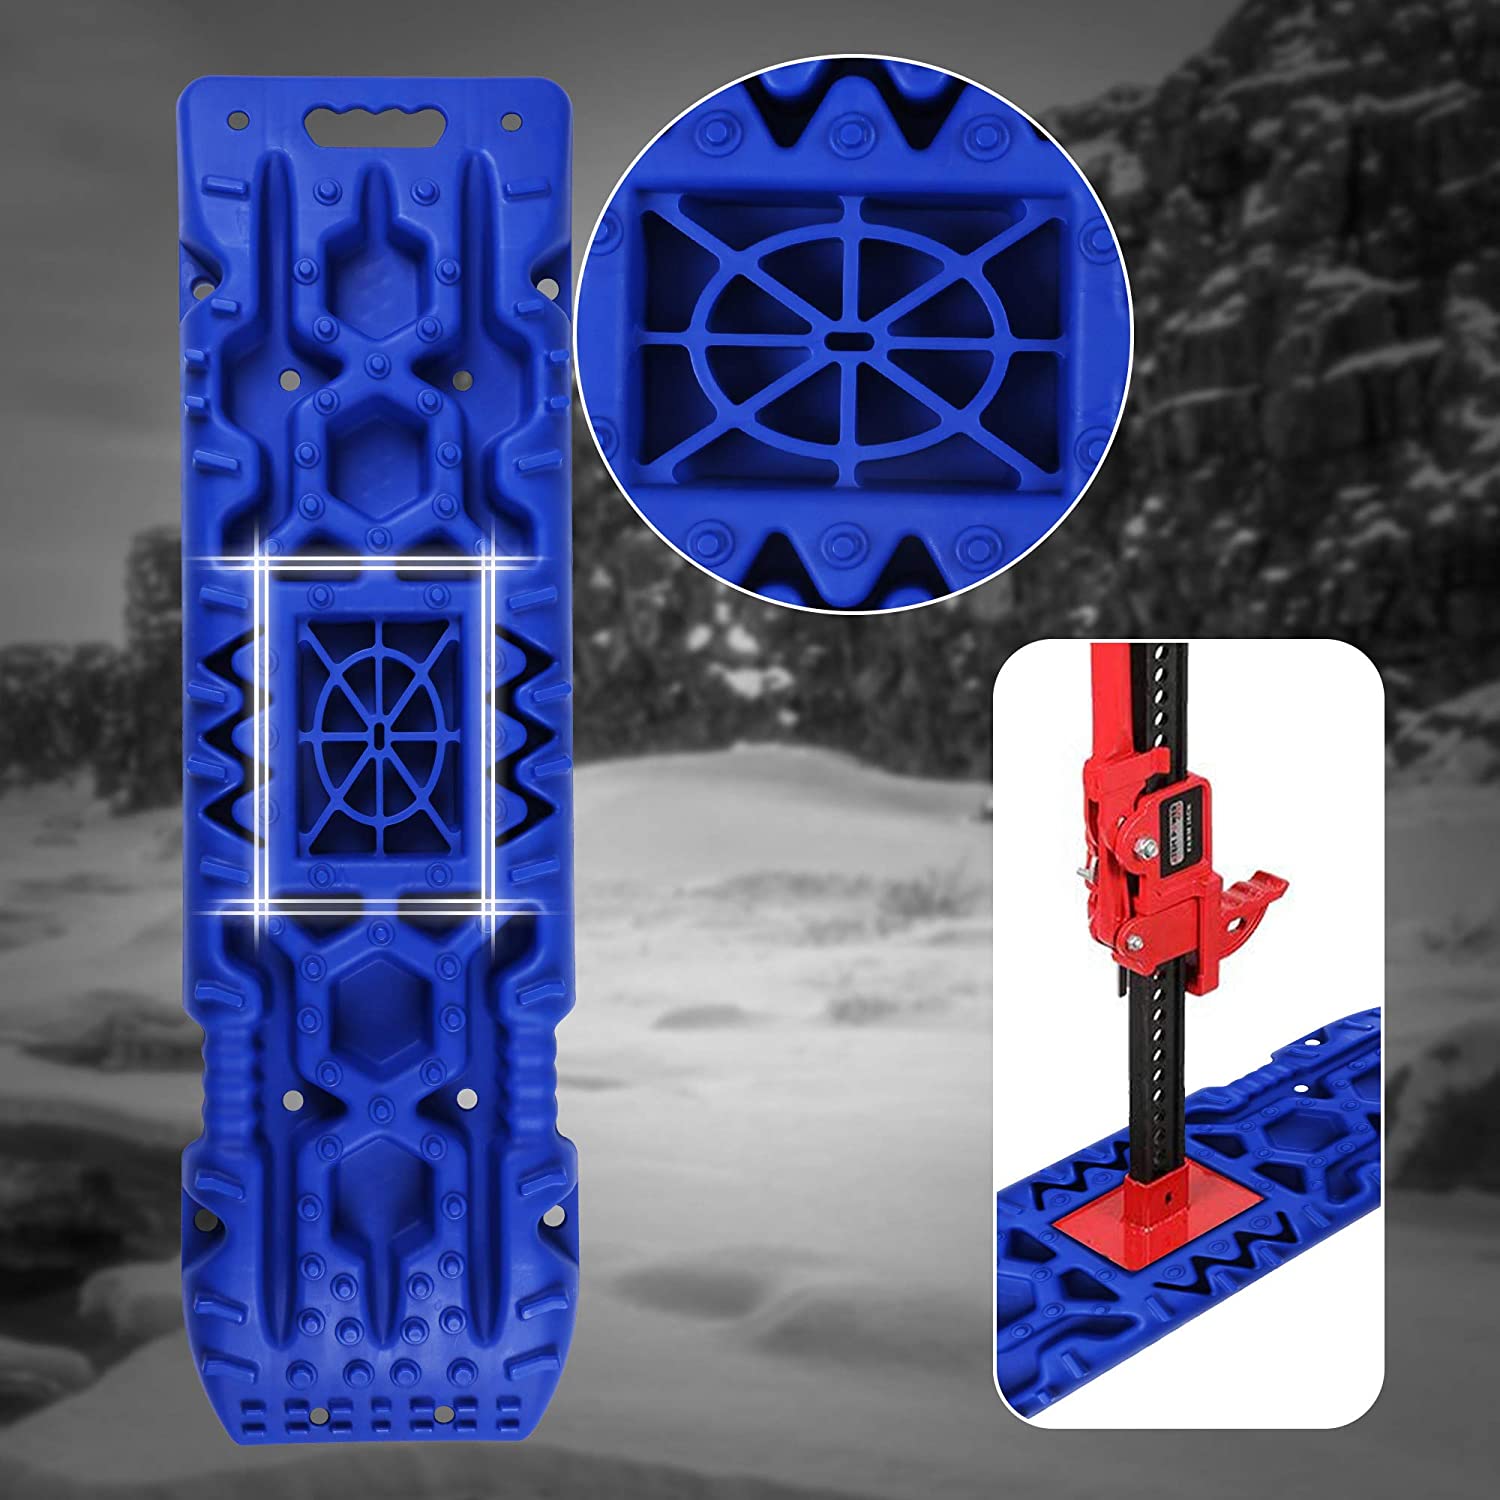 2 Pack Traction Boards with Jack Lift Base,Recovery Track Traction Mat for 4WD SUV, Jeep Tire Traction Tool Suitable for Mud, Sand, Snow, Ice Blue,Red